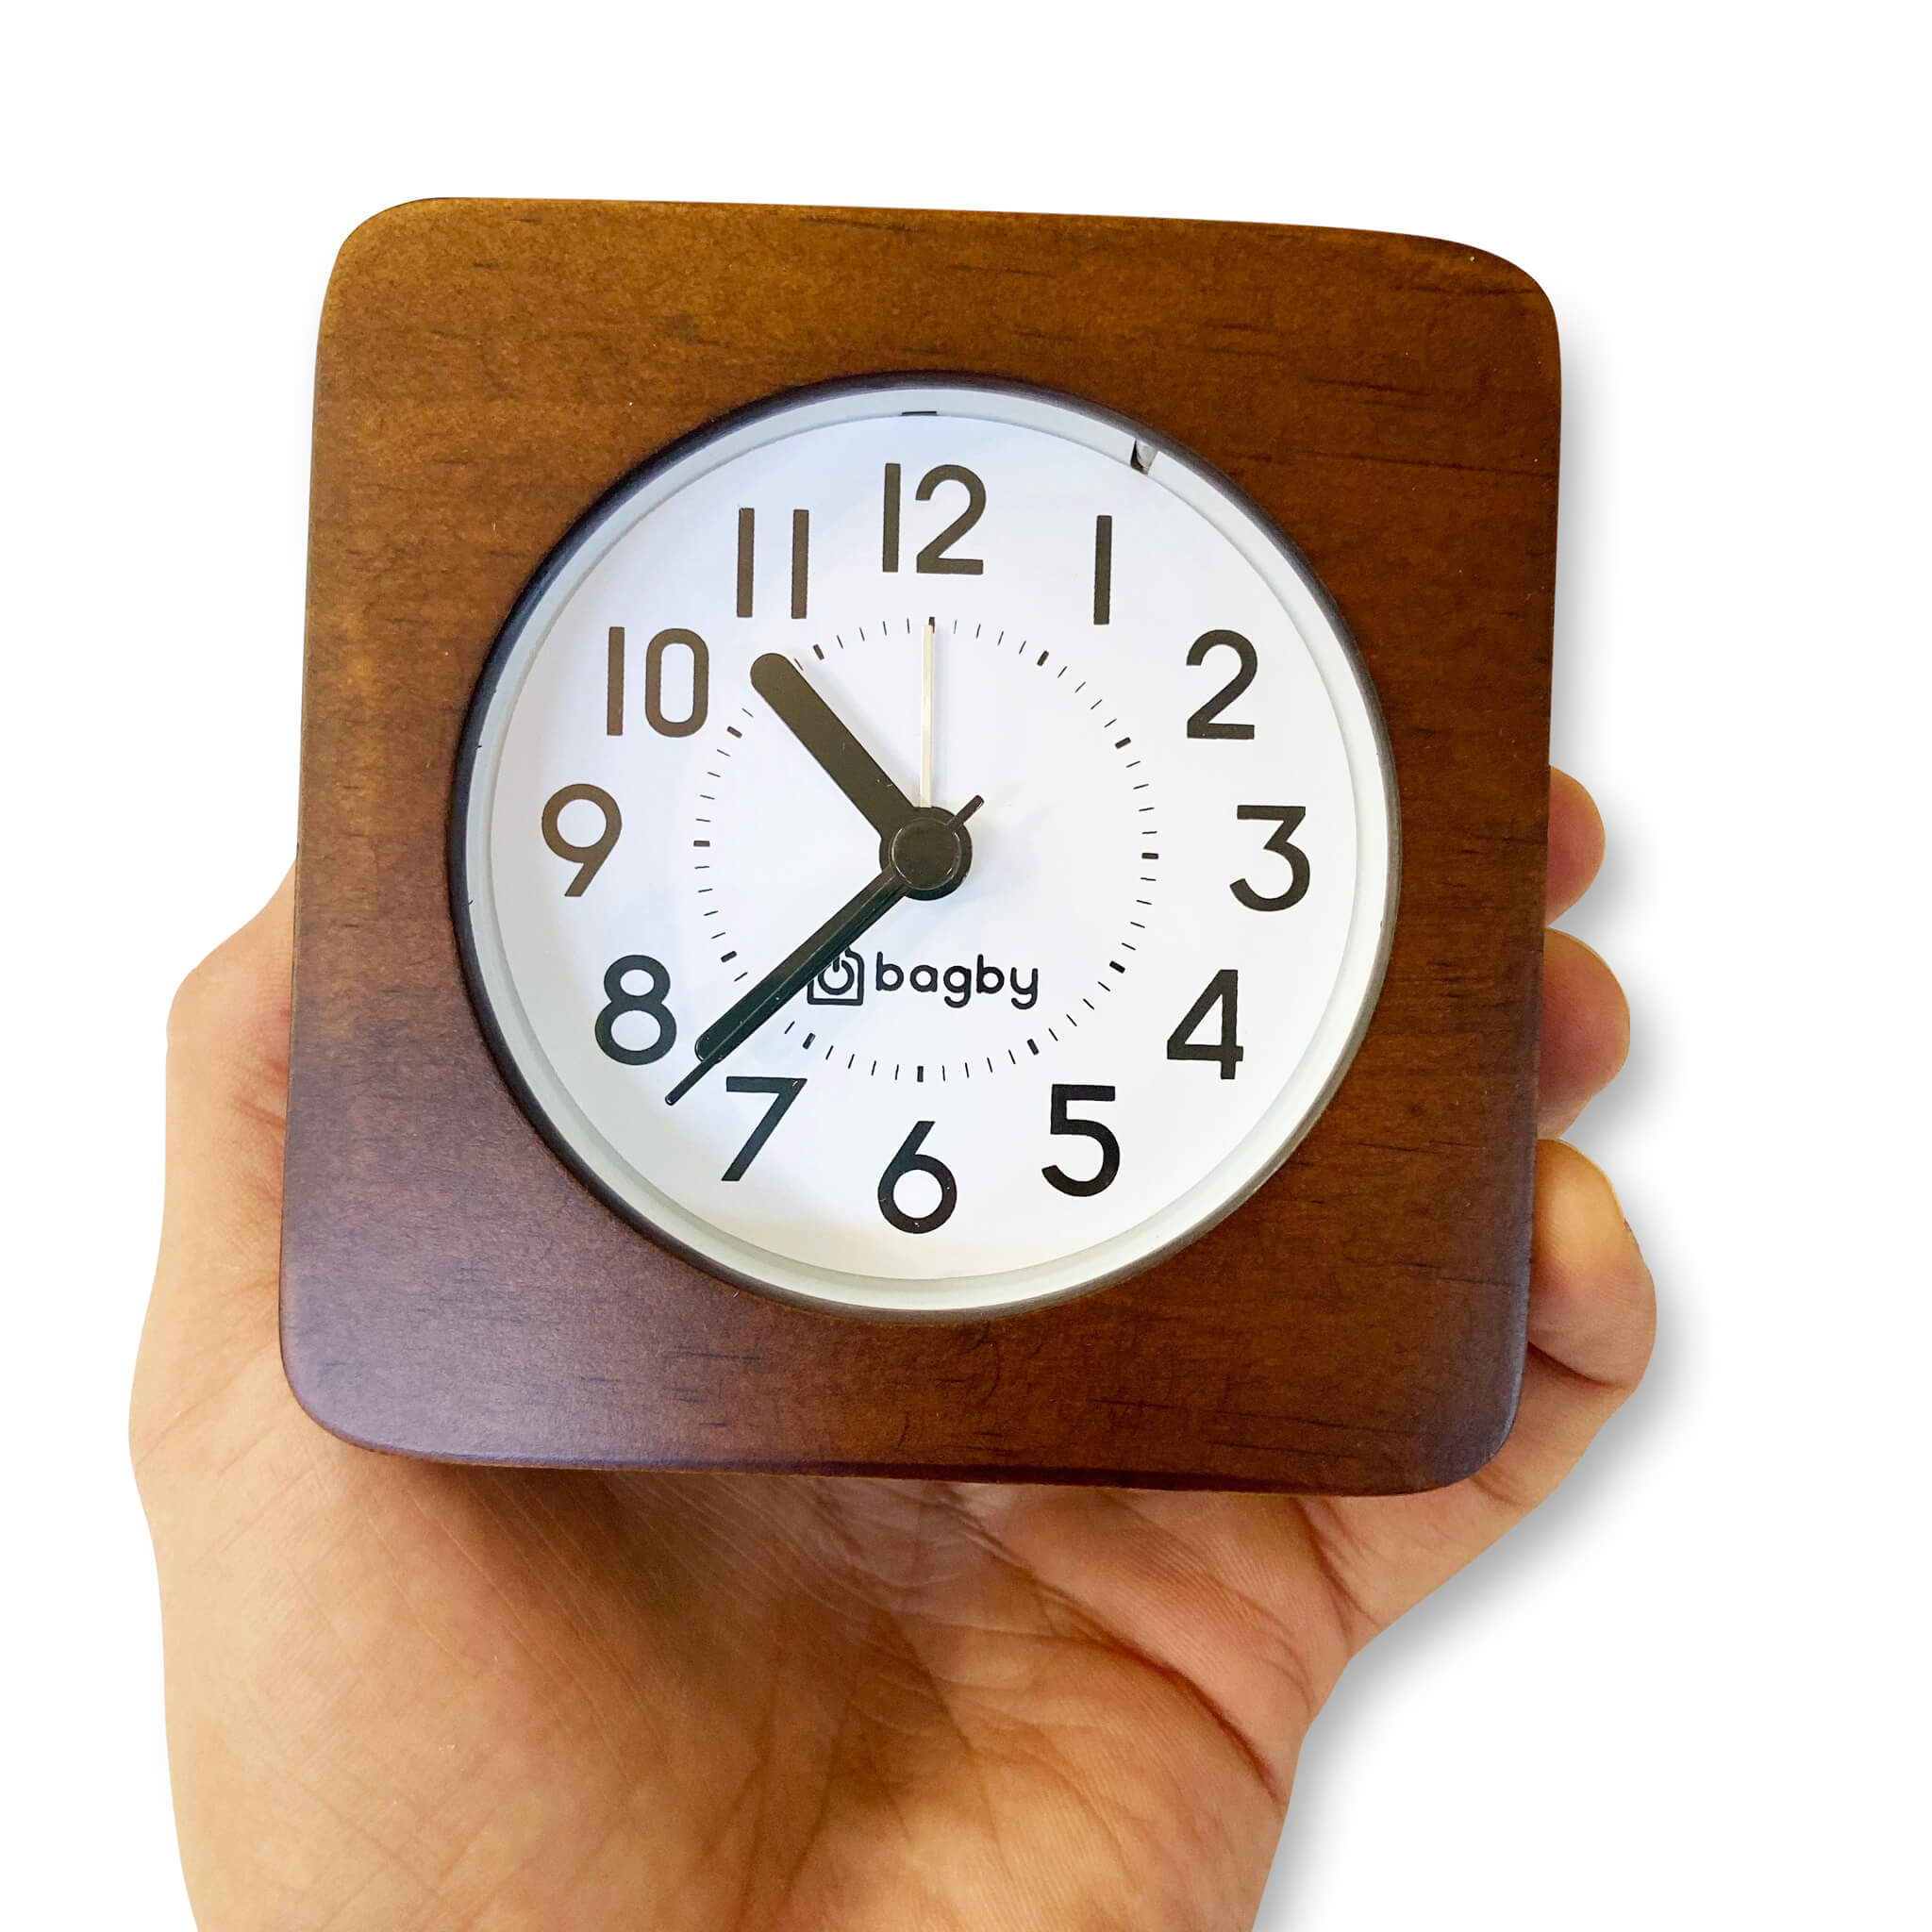 8 00 clock clipart with no hand